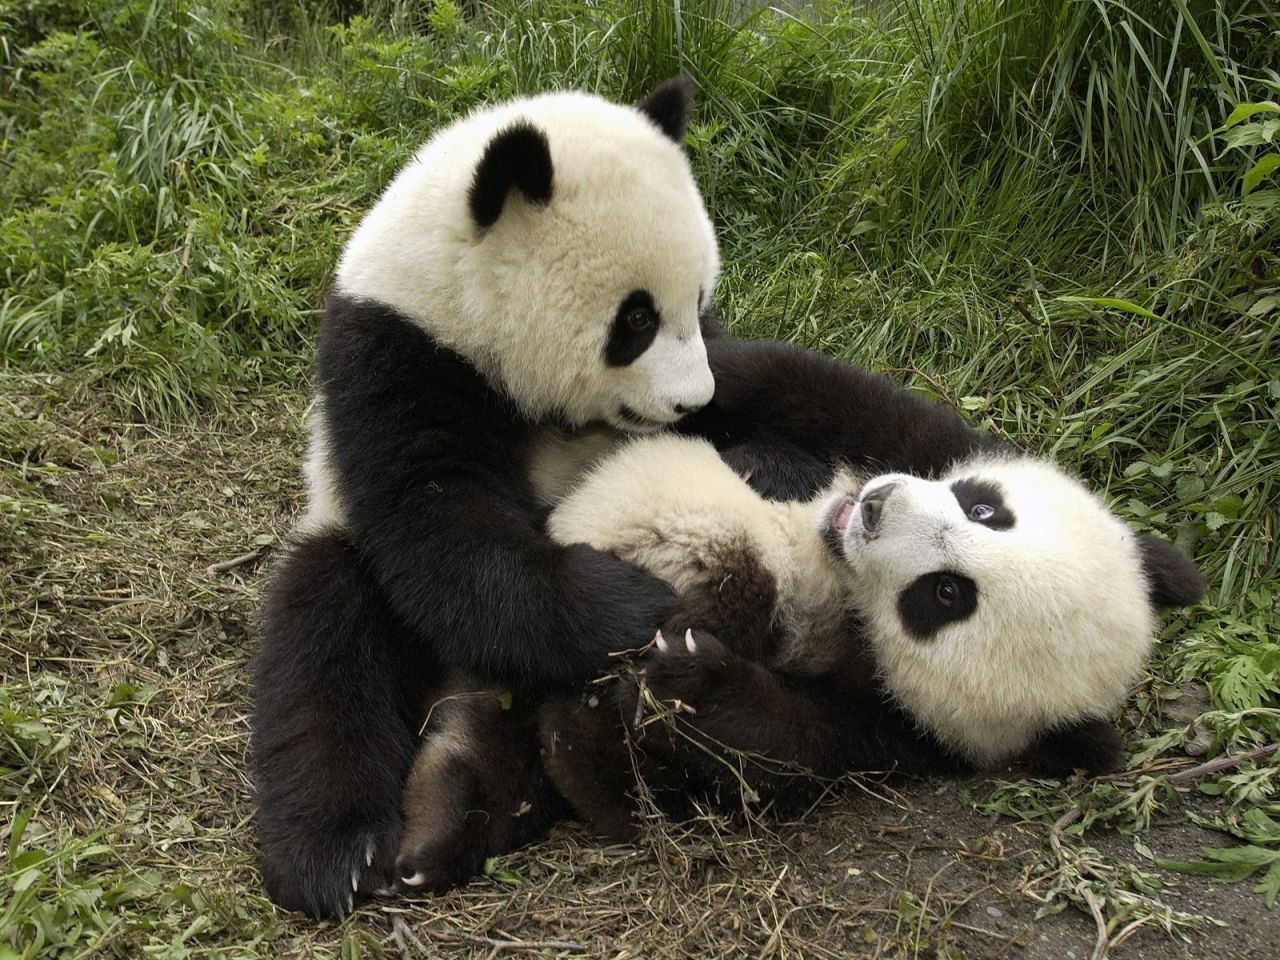 There are only around 1,600 giant pandas left in the wild. 